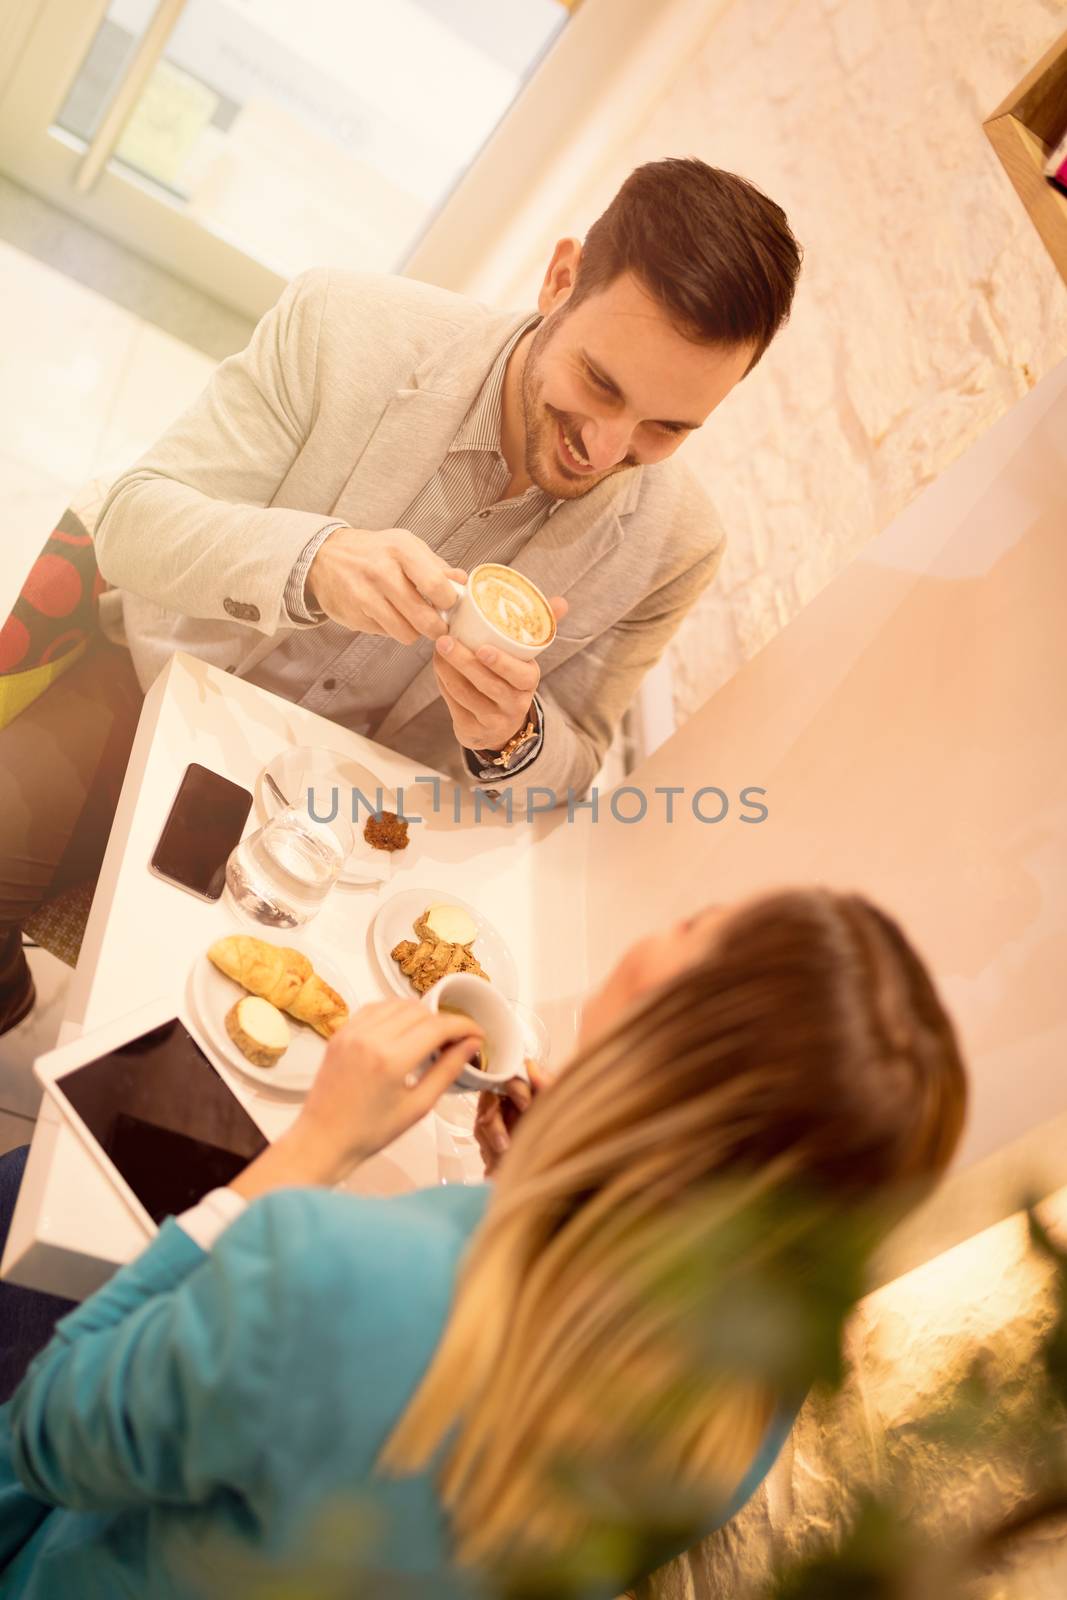 Young smiling businesspeople on a break in a cafe. They are drinking coffee and talking with smile. Selective focus.